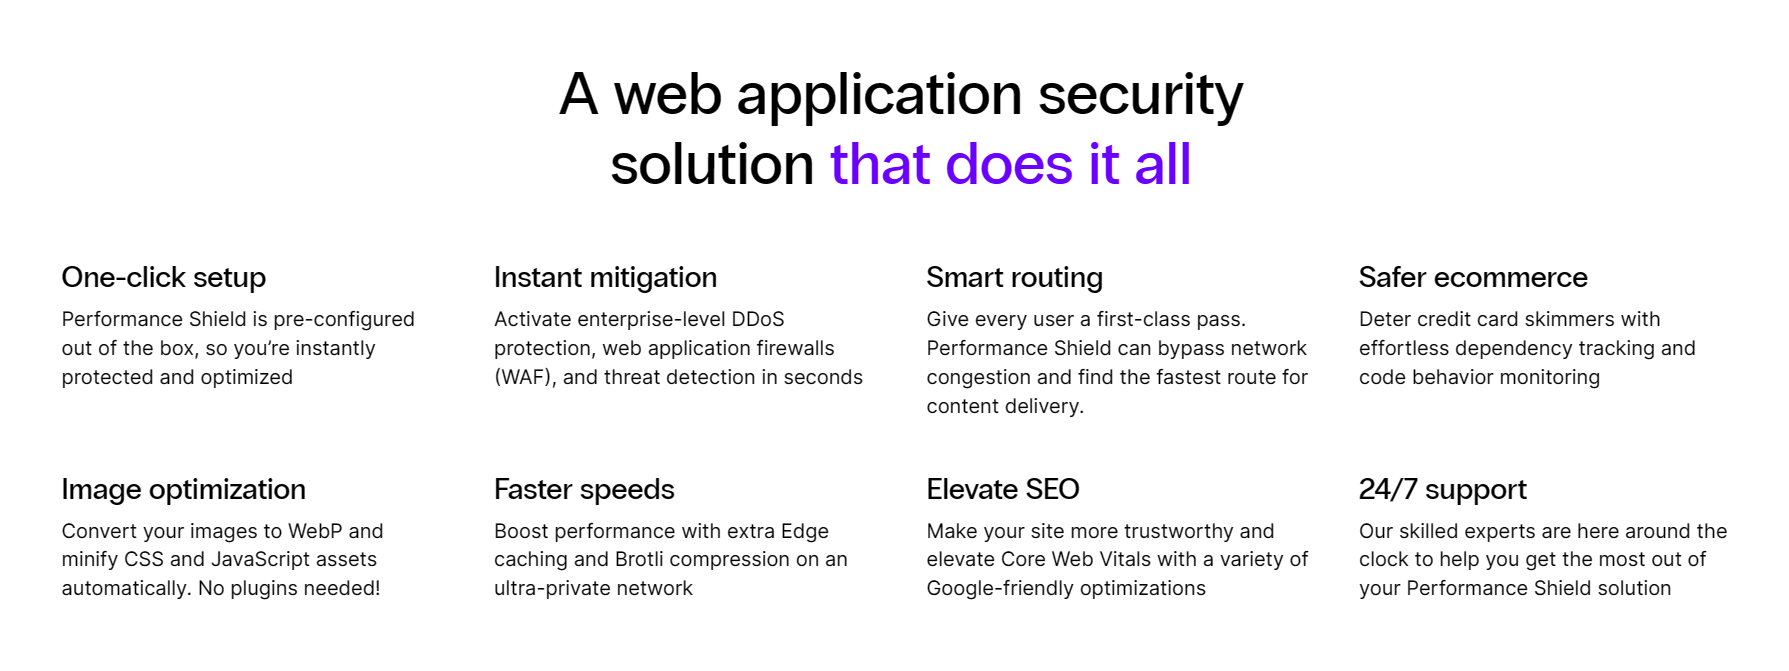 A web application security solution that does it all.